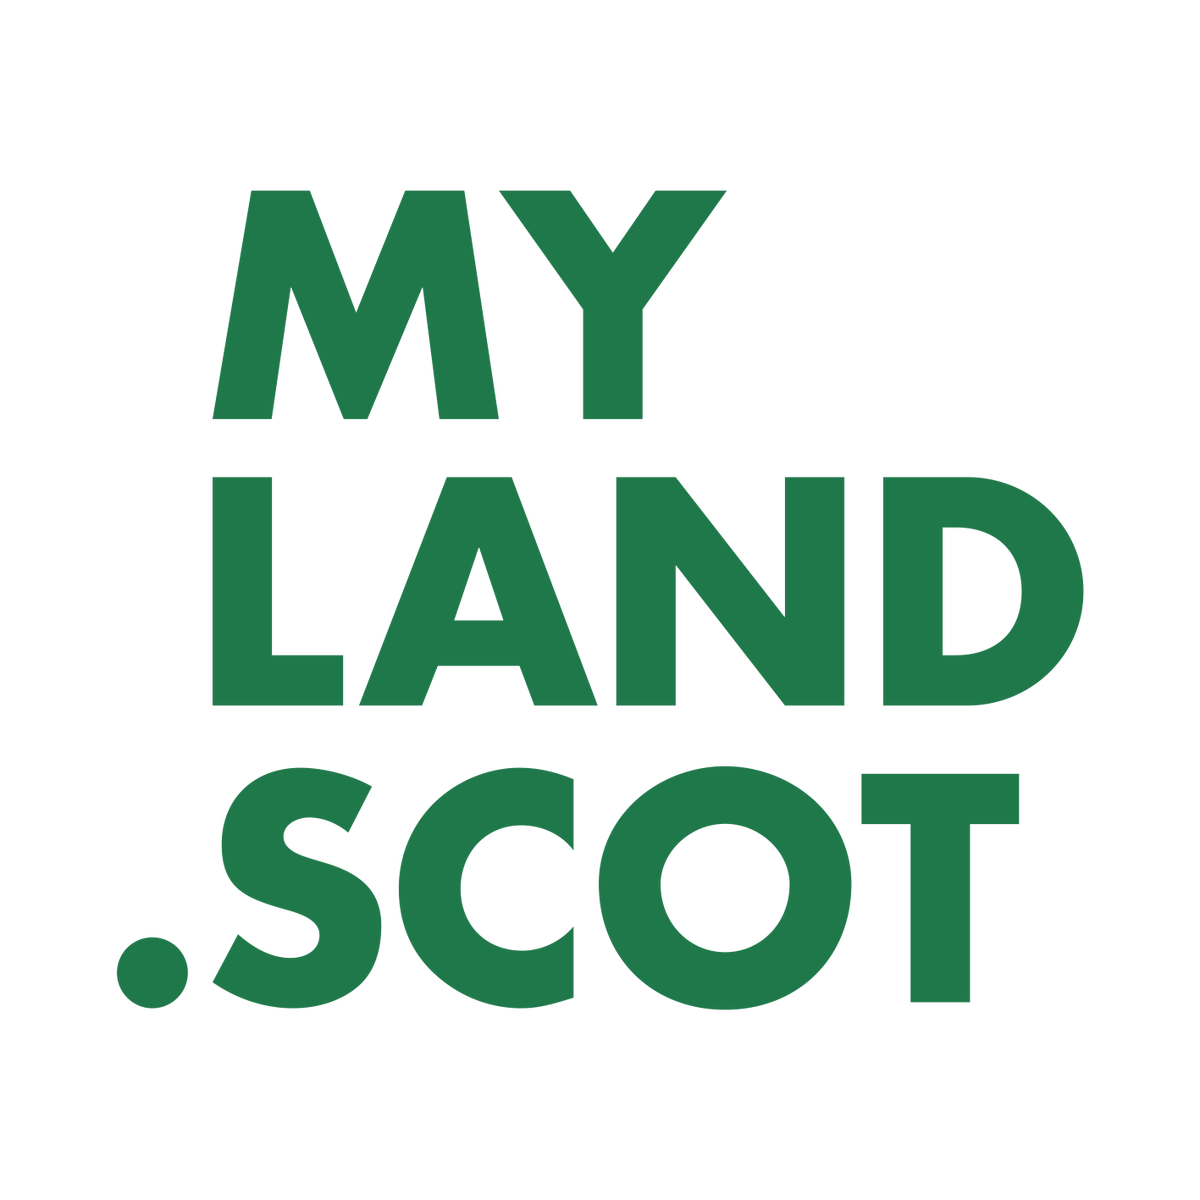 The Scottish Land Commission will be closed for their festive break from midday on Friday 22 December until Wednesday 3 January inclusive.